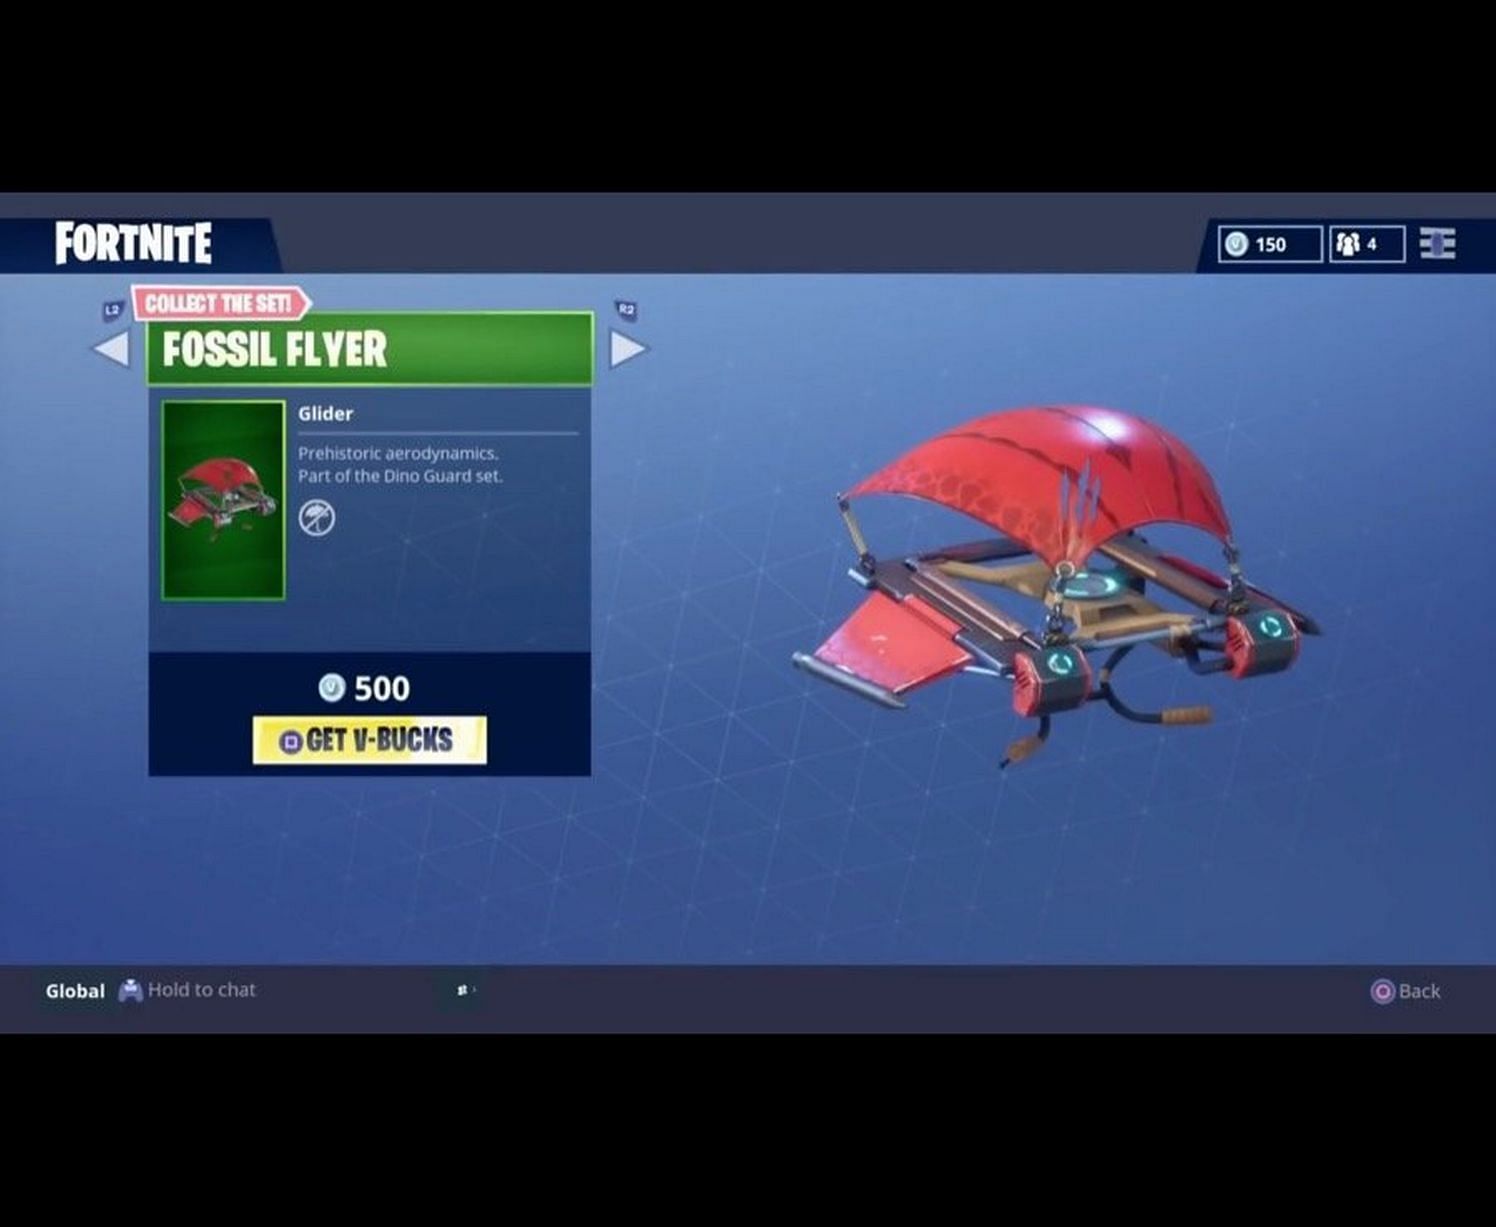 The Fossil Flyer glider in the Fortnite item shop (Image via Epic Games)